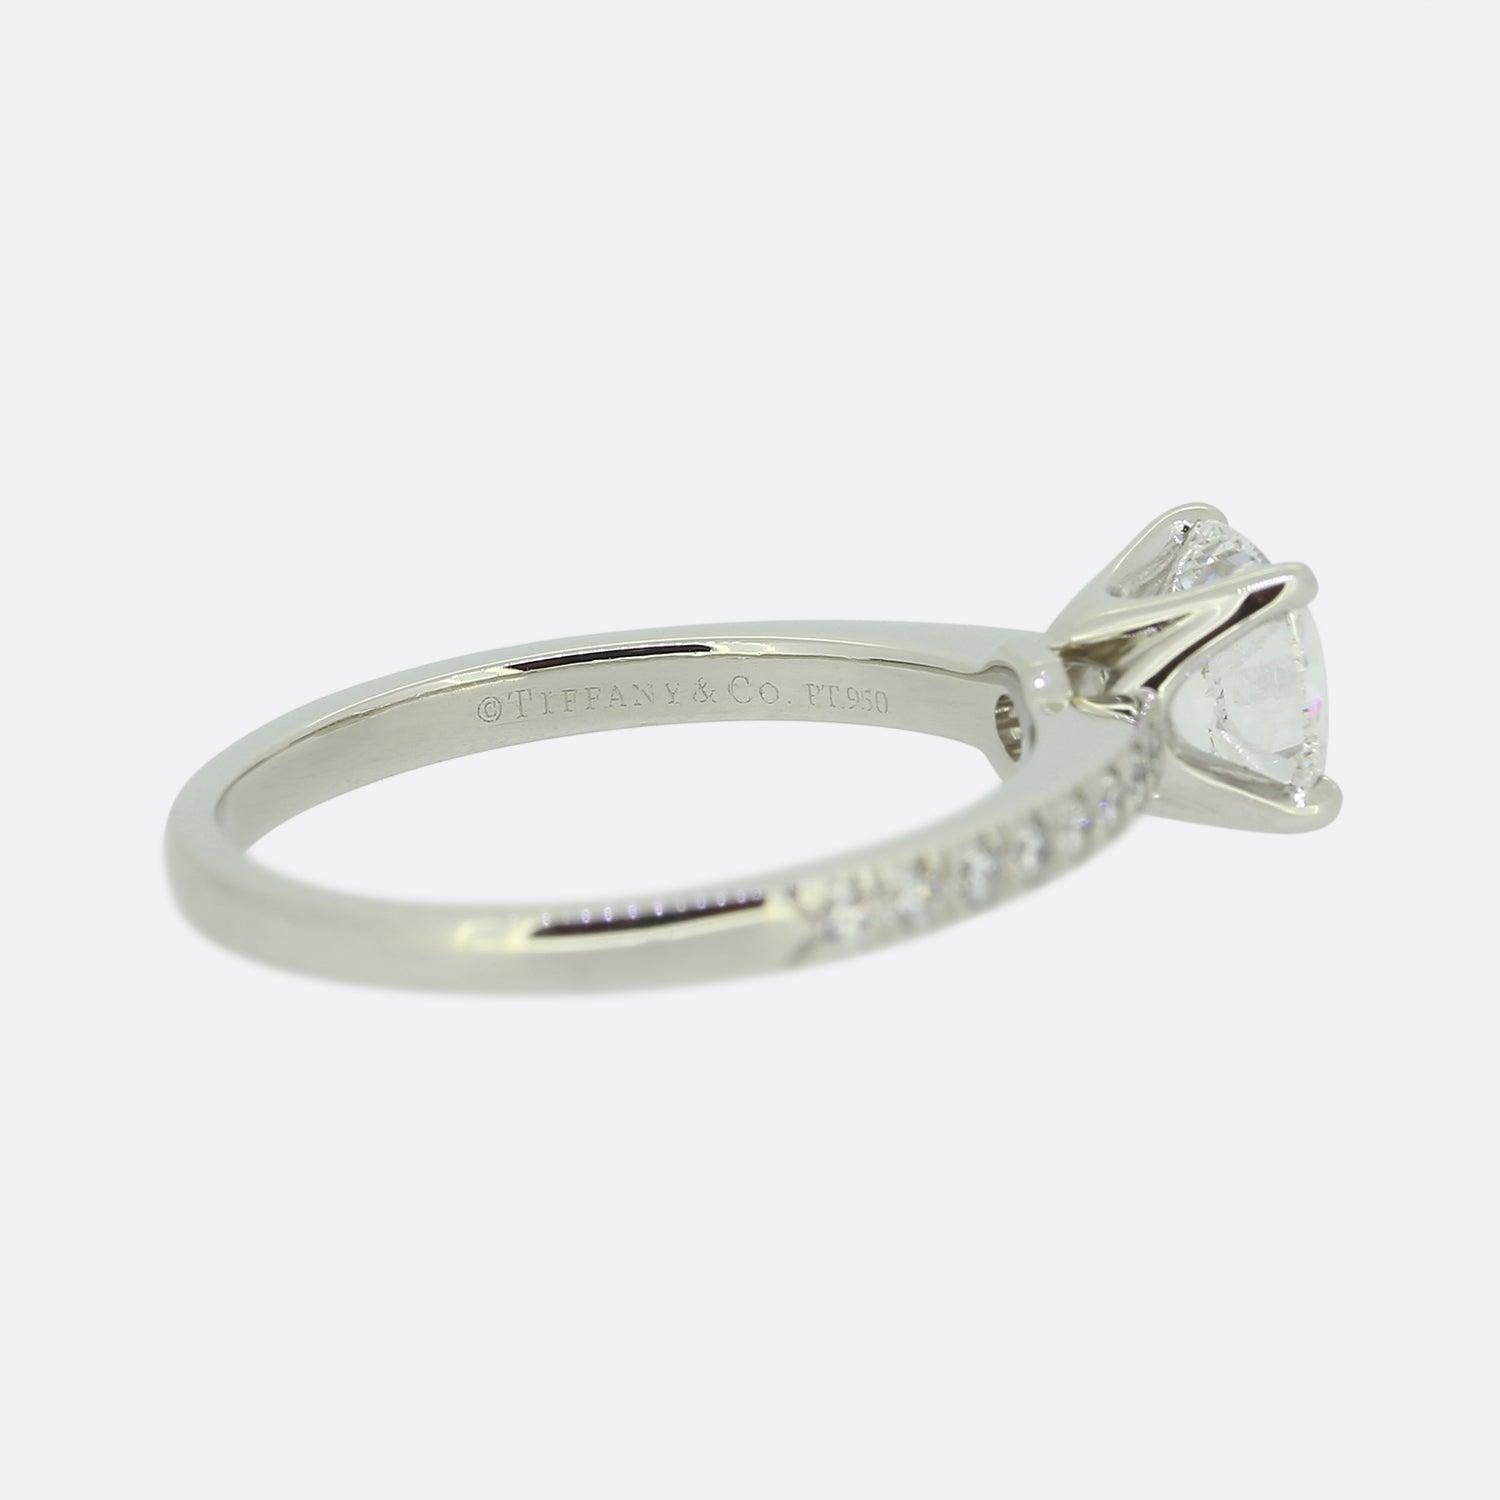 Tiffany & Co. 1.04 Carat Diamond Engagement Ring For Sale 1